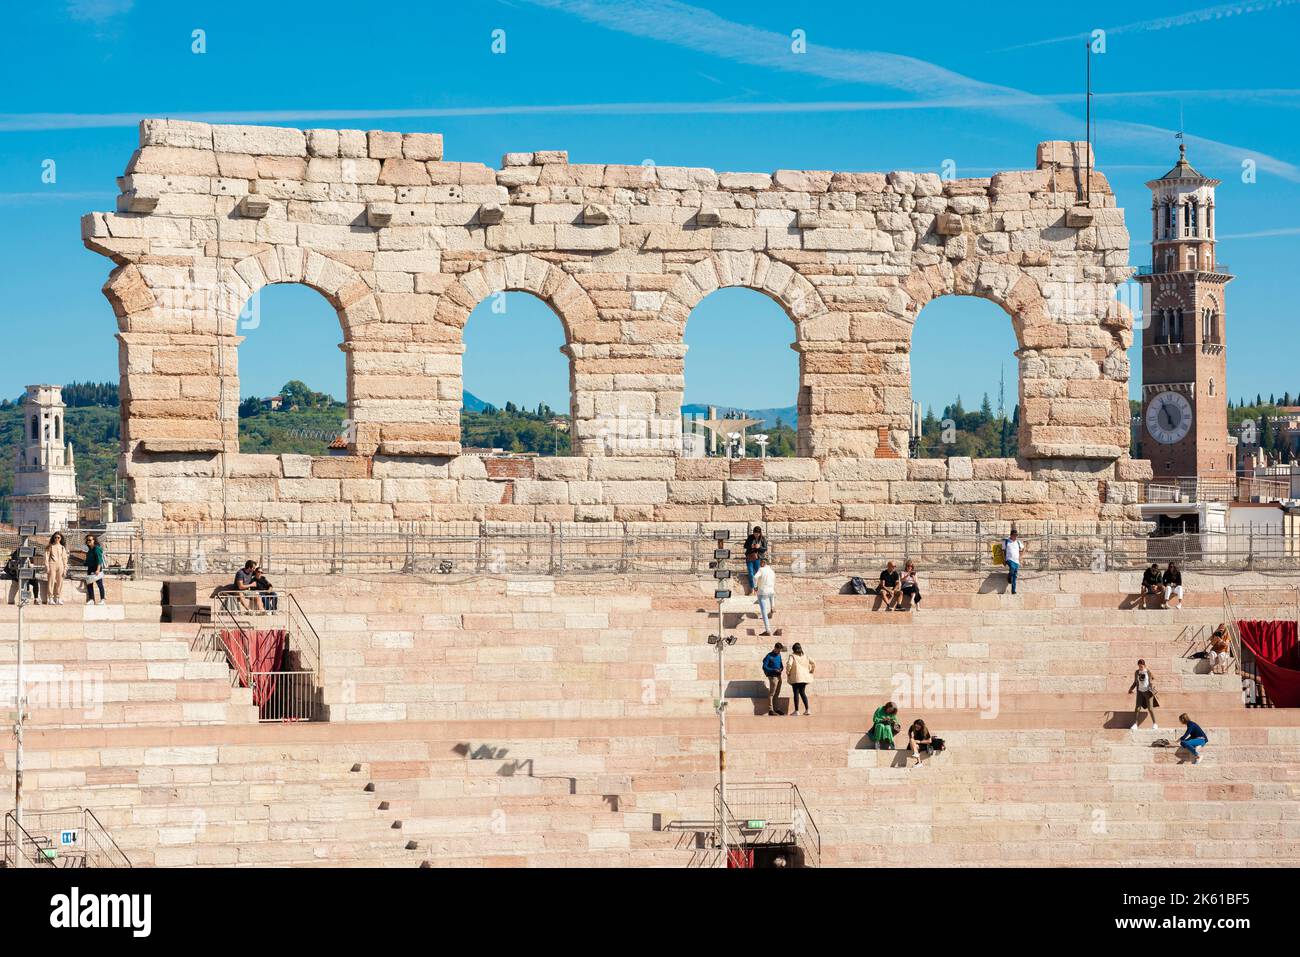 Verona, view in summer of the remaining four arches of the outer wall of the Roman Arena with tourists seated inside the amphitheater, Verona, Italy Stock Photo